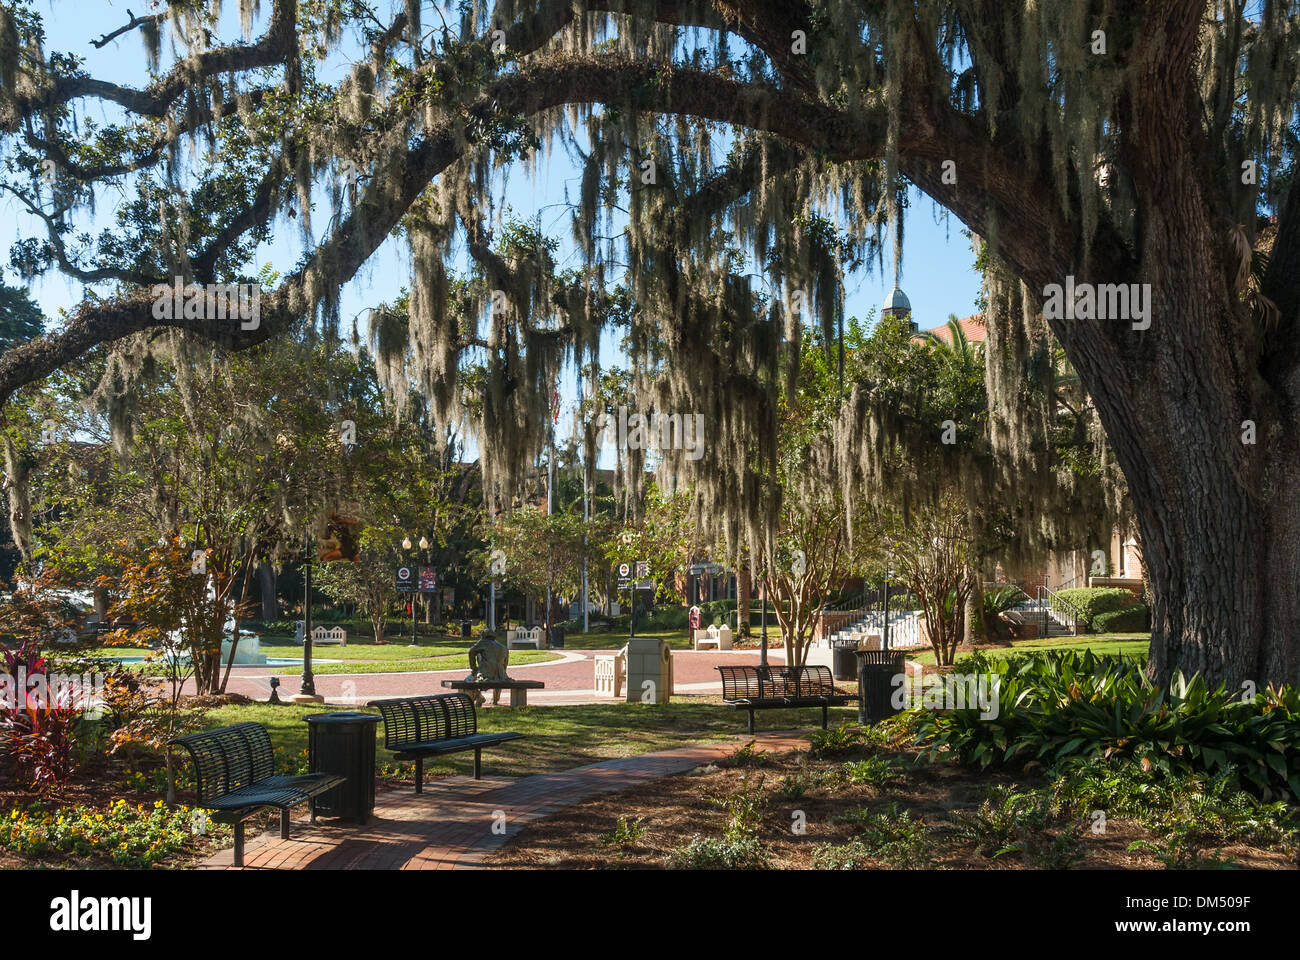 Spanish Moss hangs from a giant oak at the Westcott Building entrance to Florida State University in Tallahassee, Florida. (USA) Stock Photo